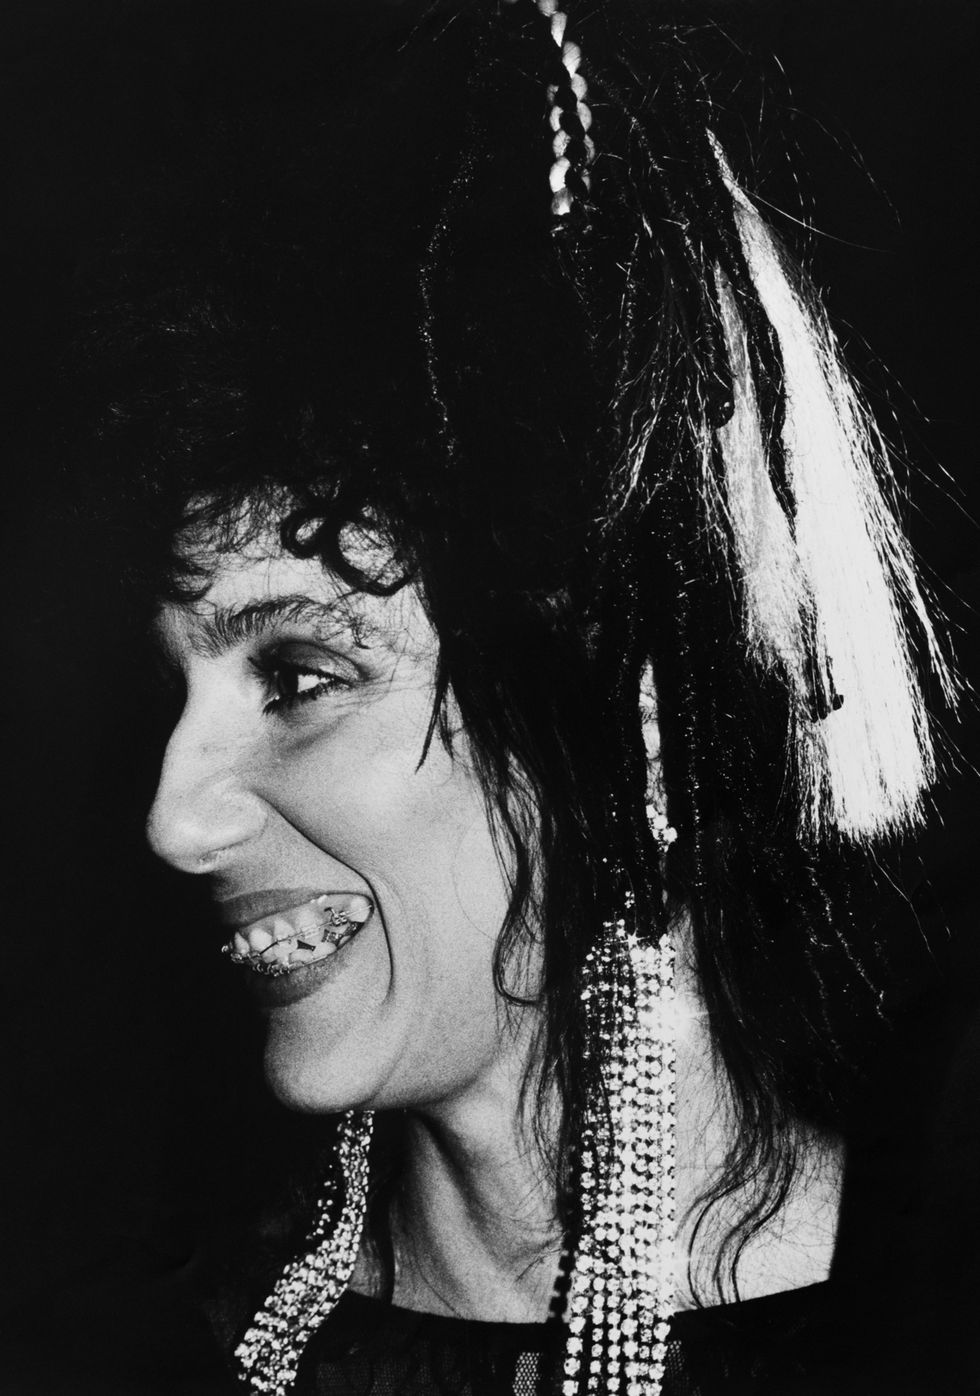 singer cher attends the bafta awards, london, march 25th 1984 photo by dave hogangetty images